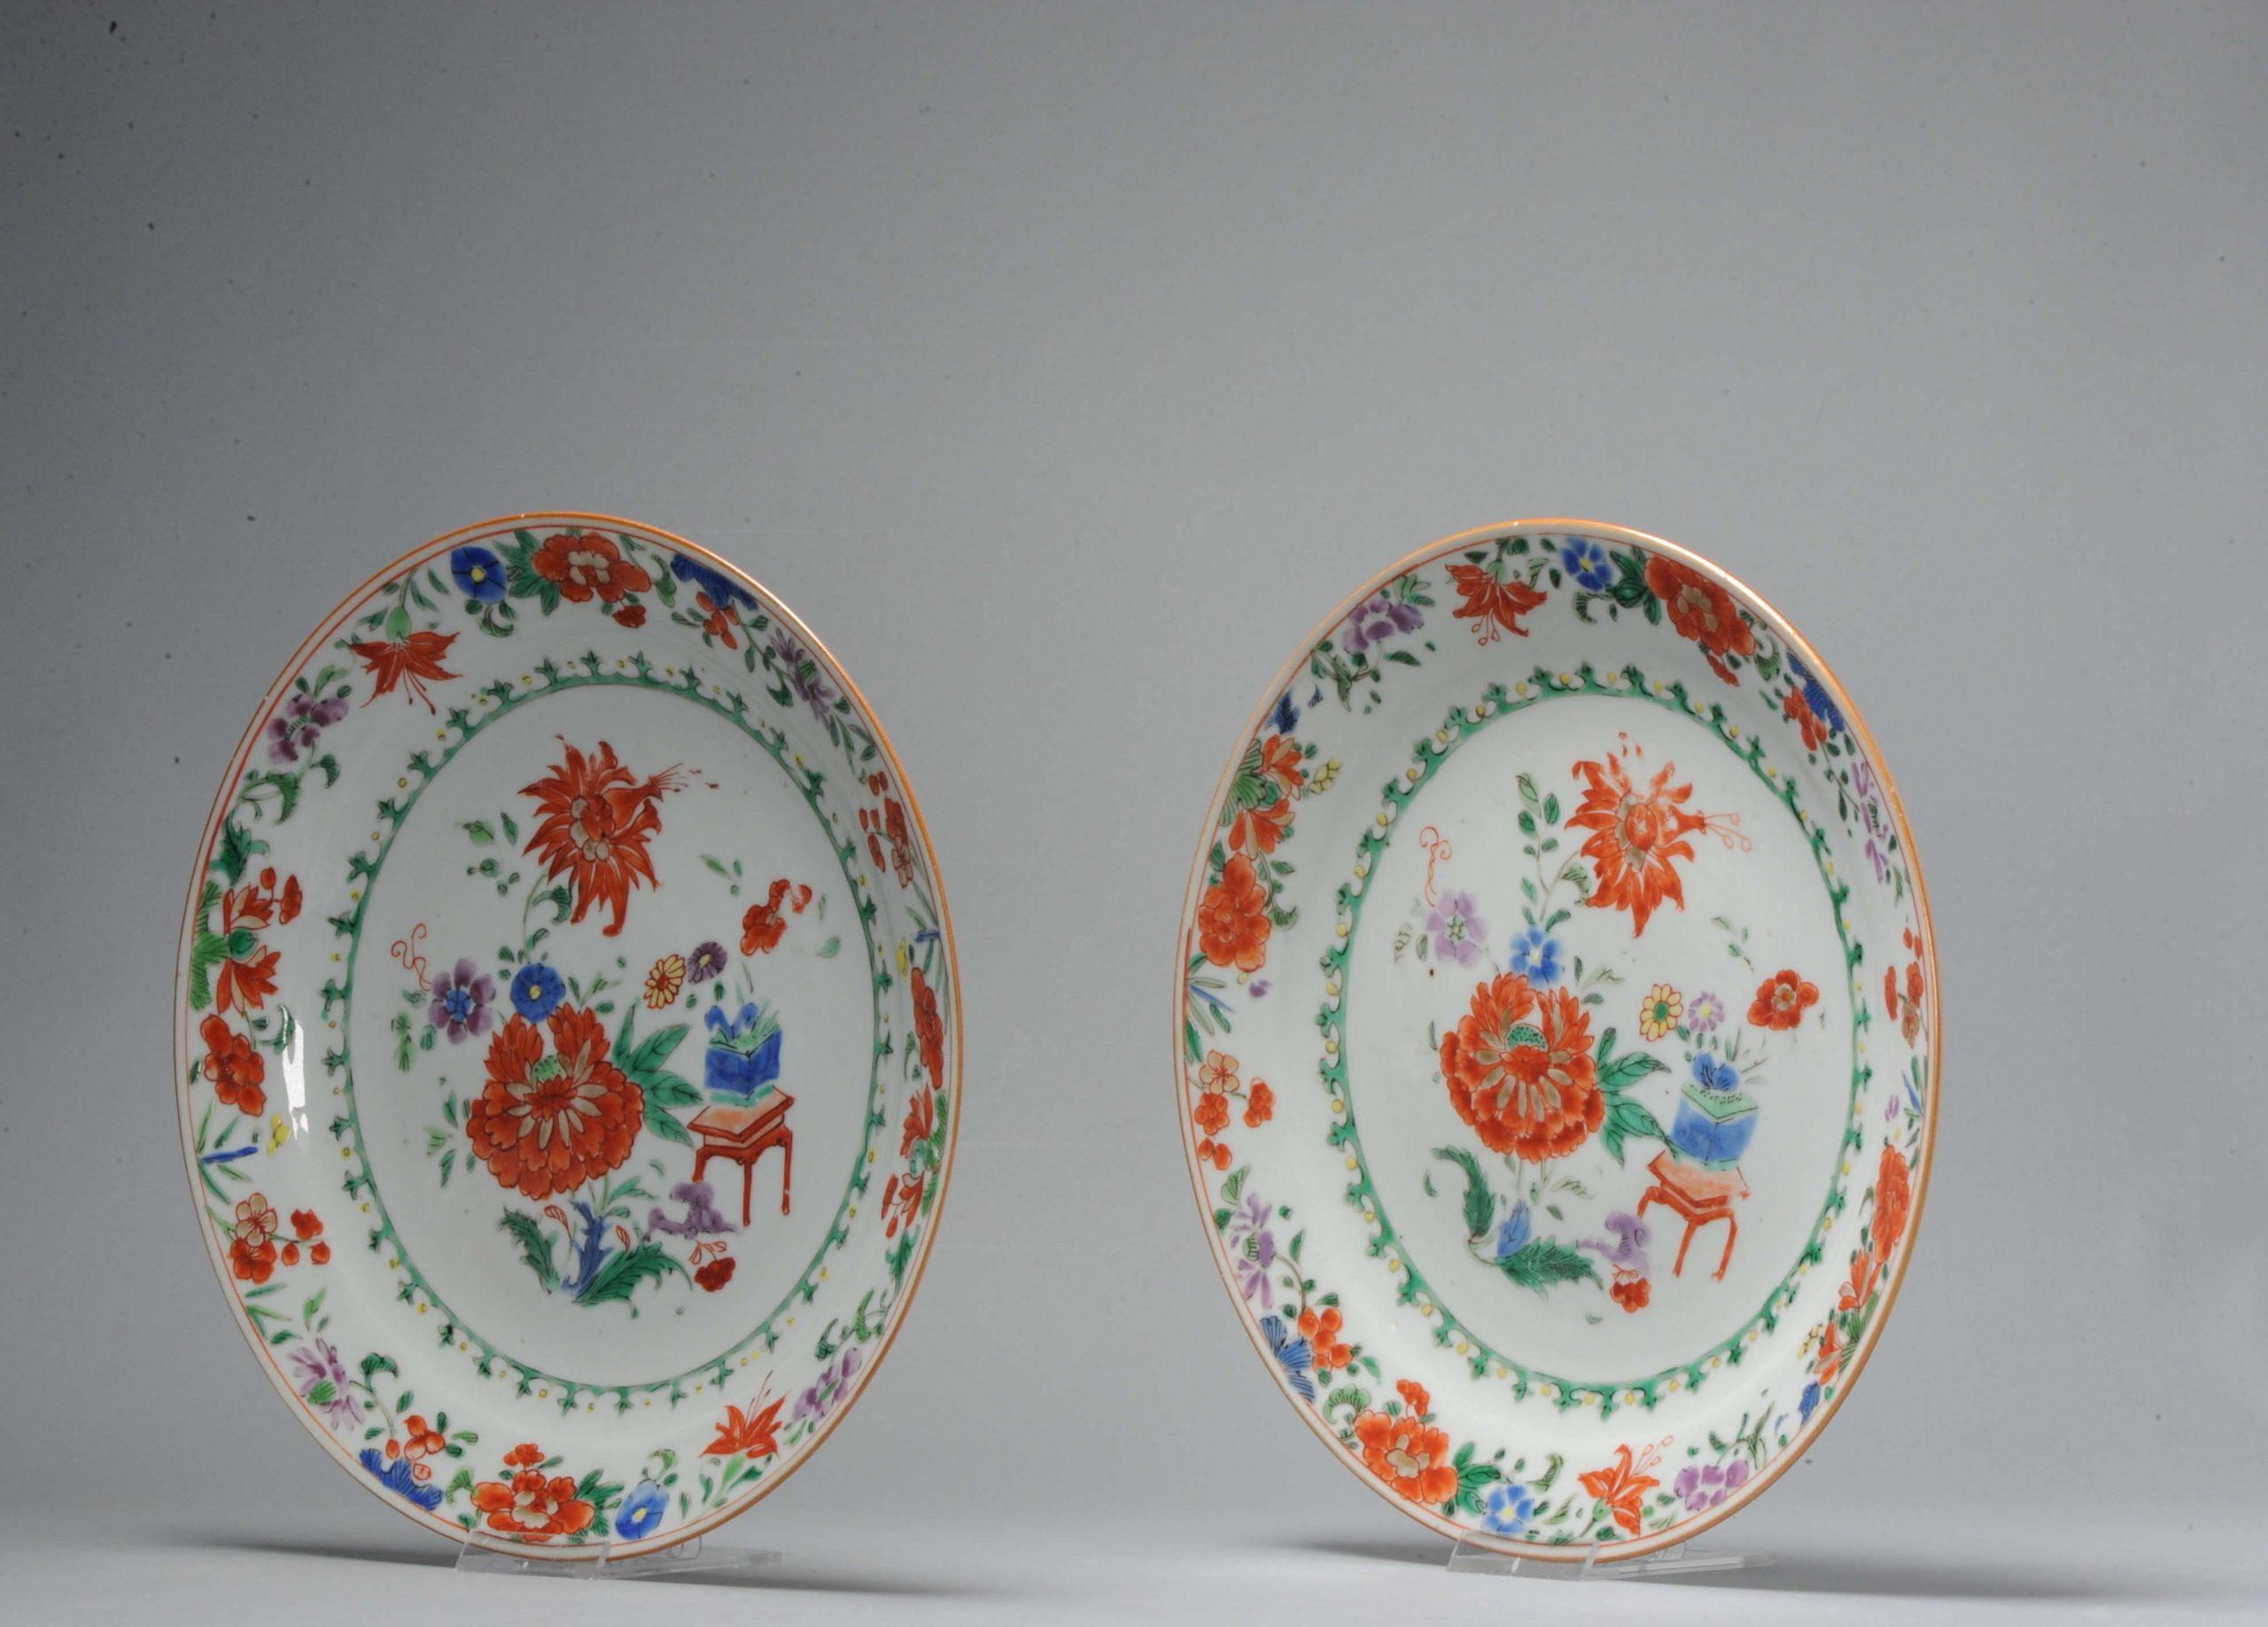 Antique Porcelain Pre Bencharong Fencai Plates with Flowers Green, 18/19th Cen In Good Condition For Sale In Amsterdam, Noord Holland